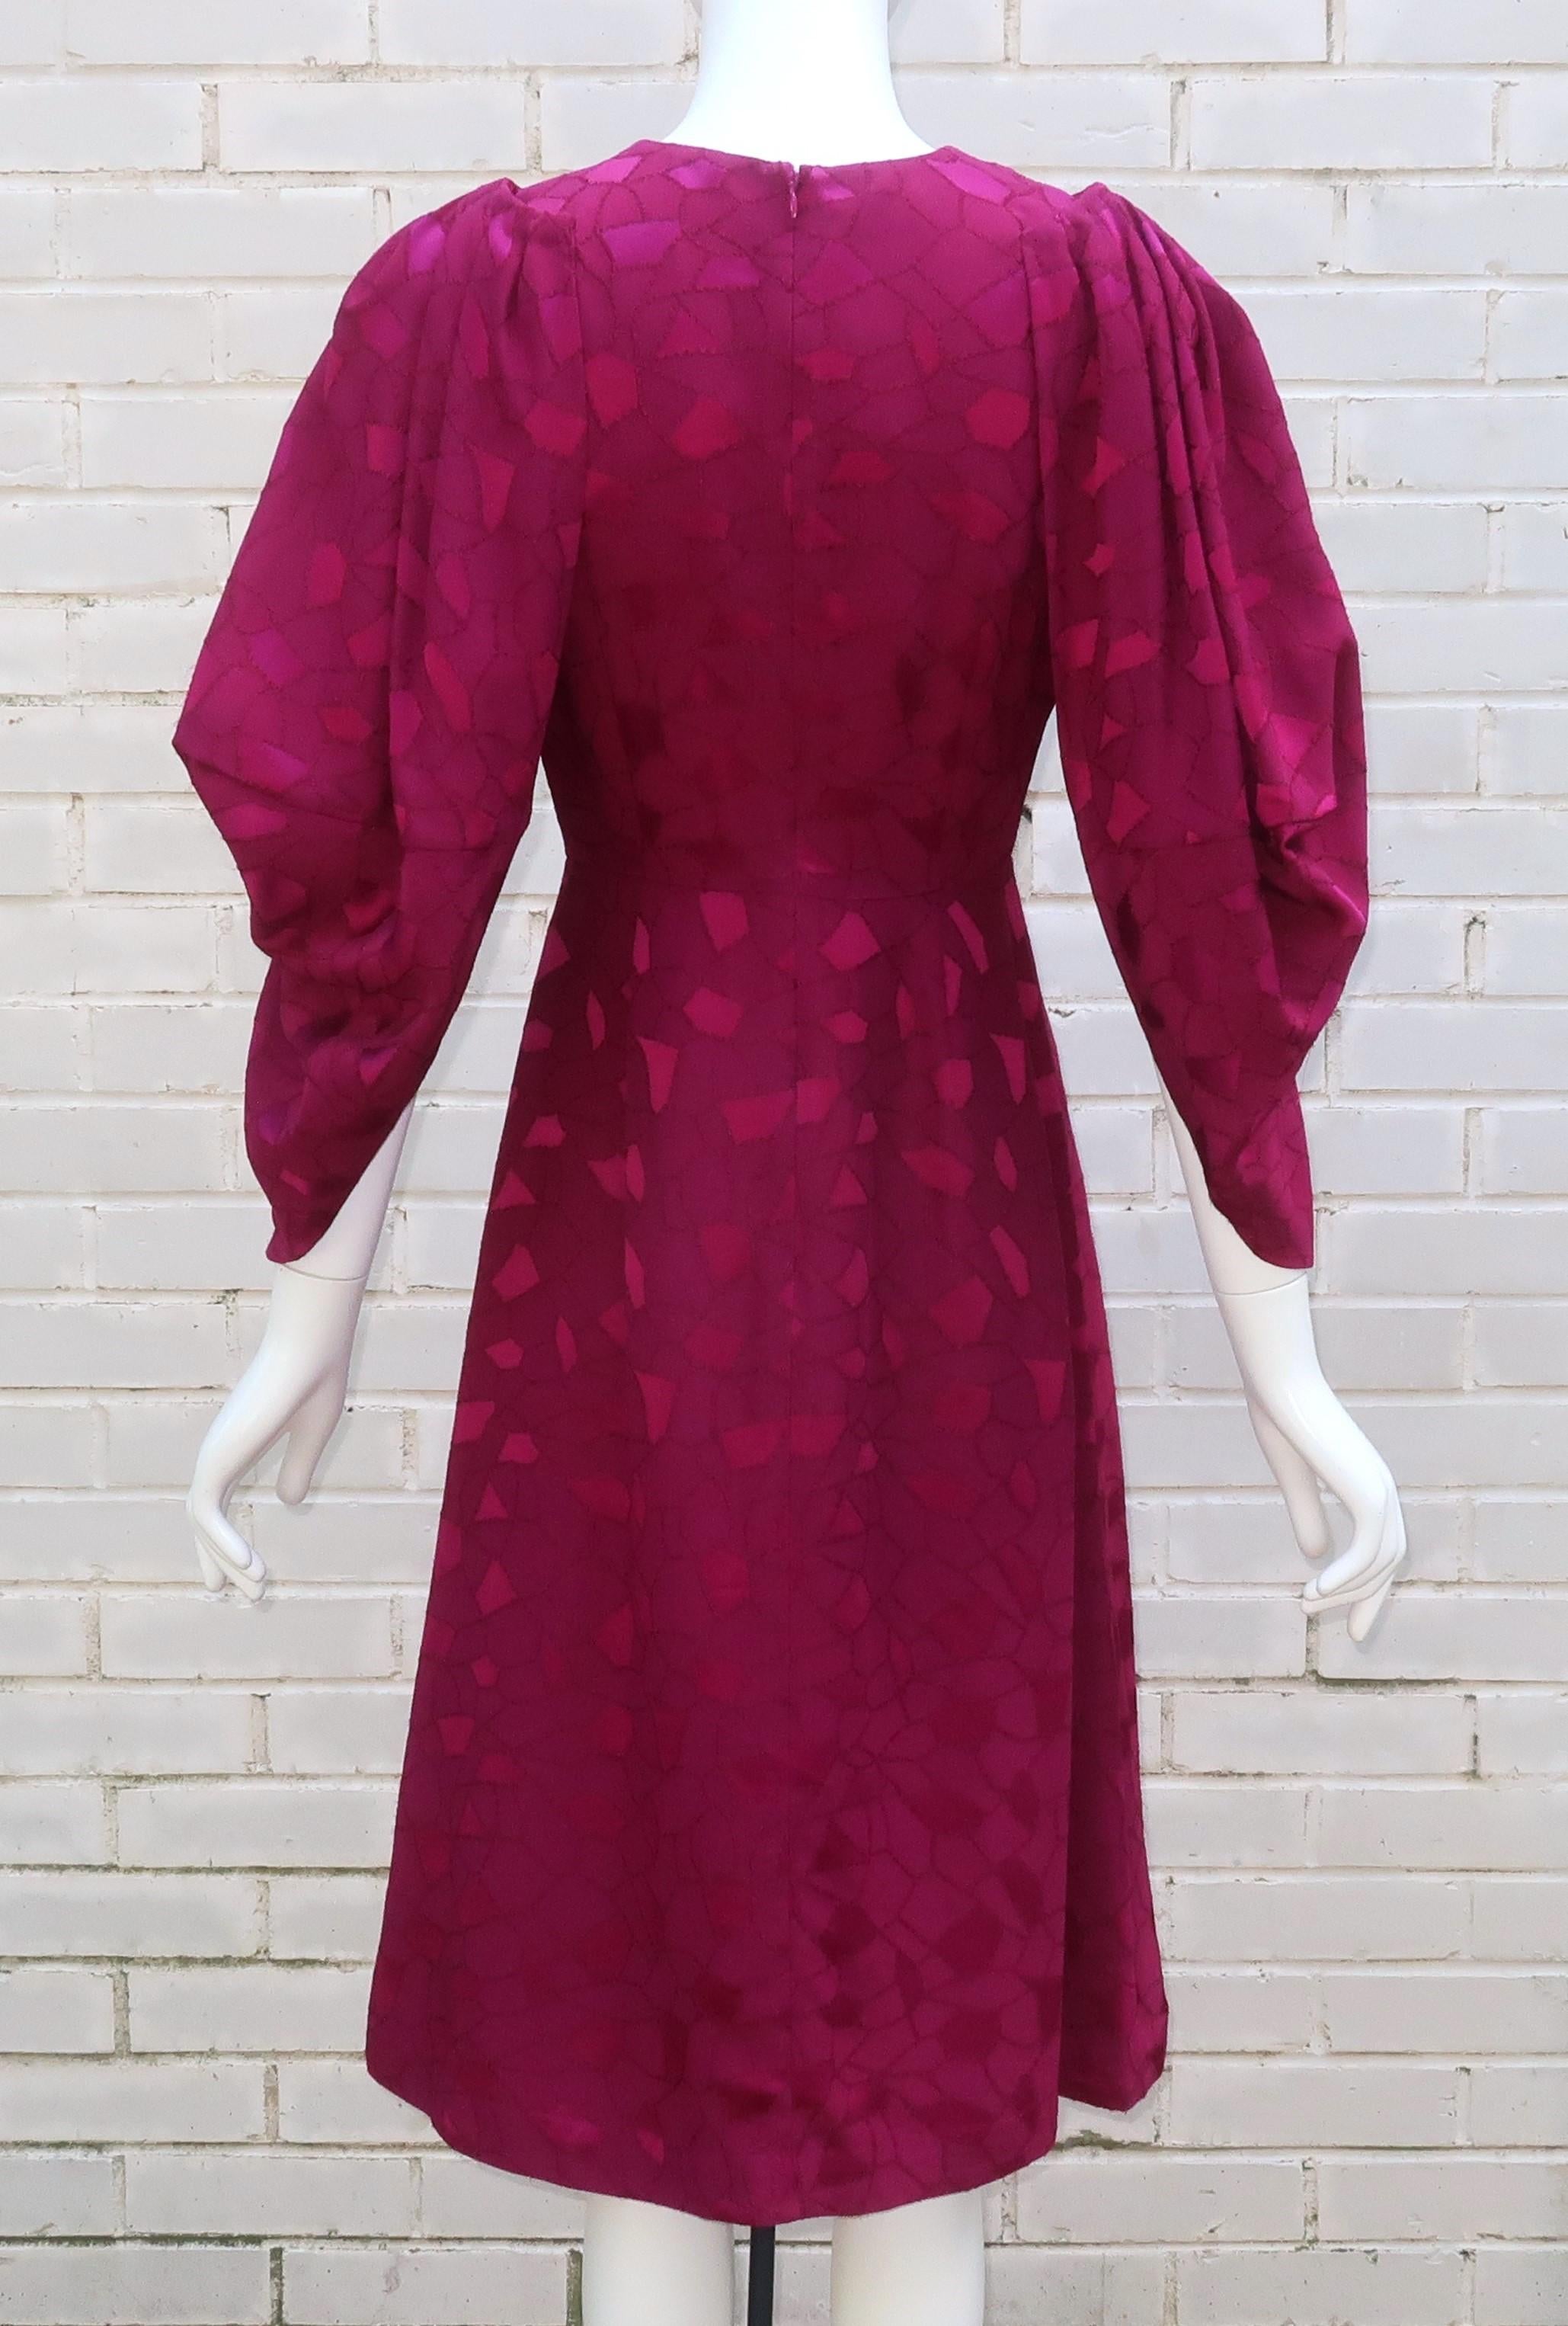 CO Cocoon Sleeve Magenta Dress, 2018 For Sale 3